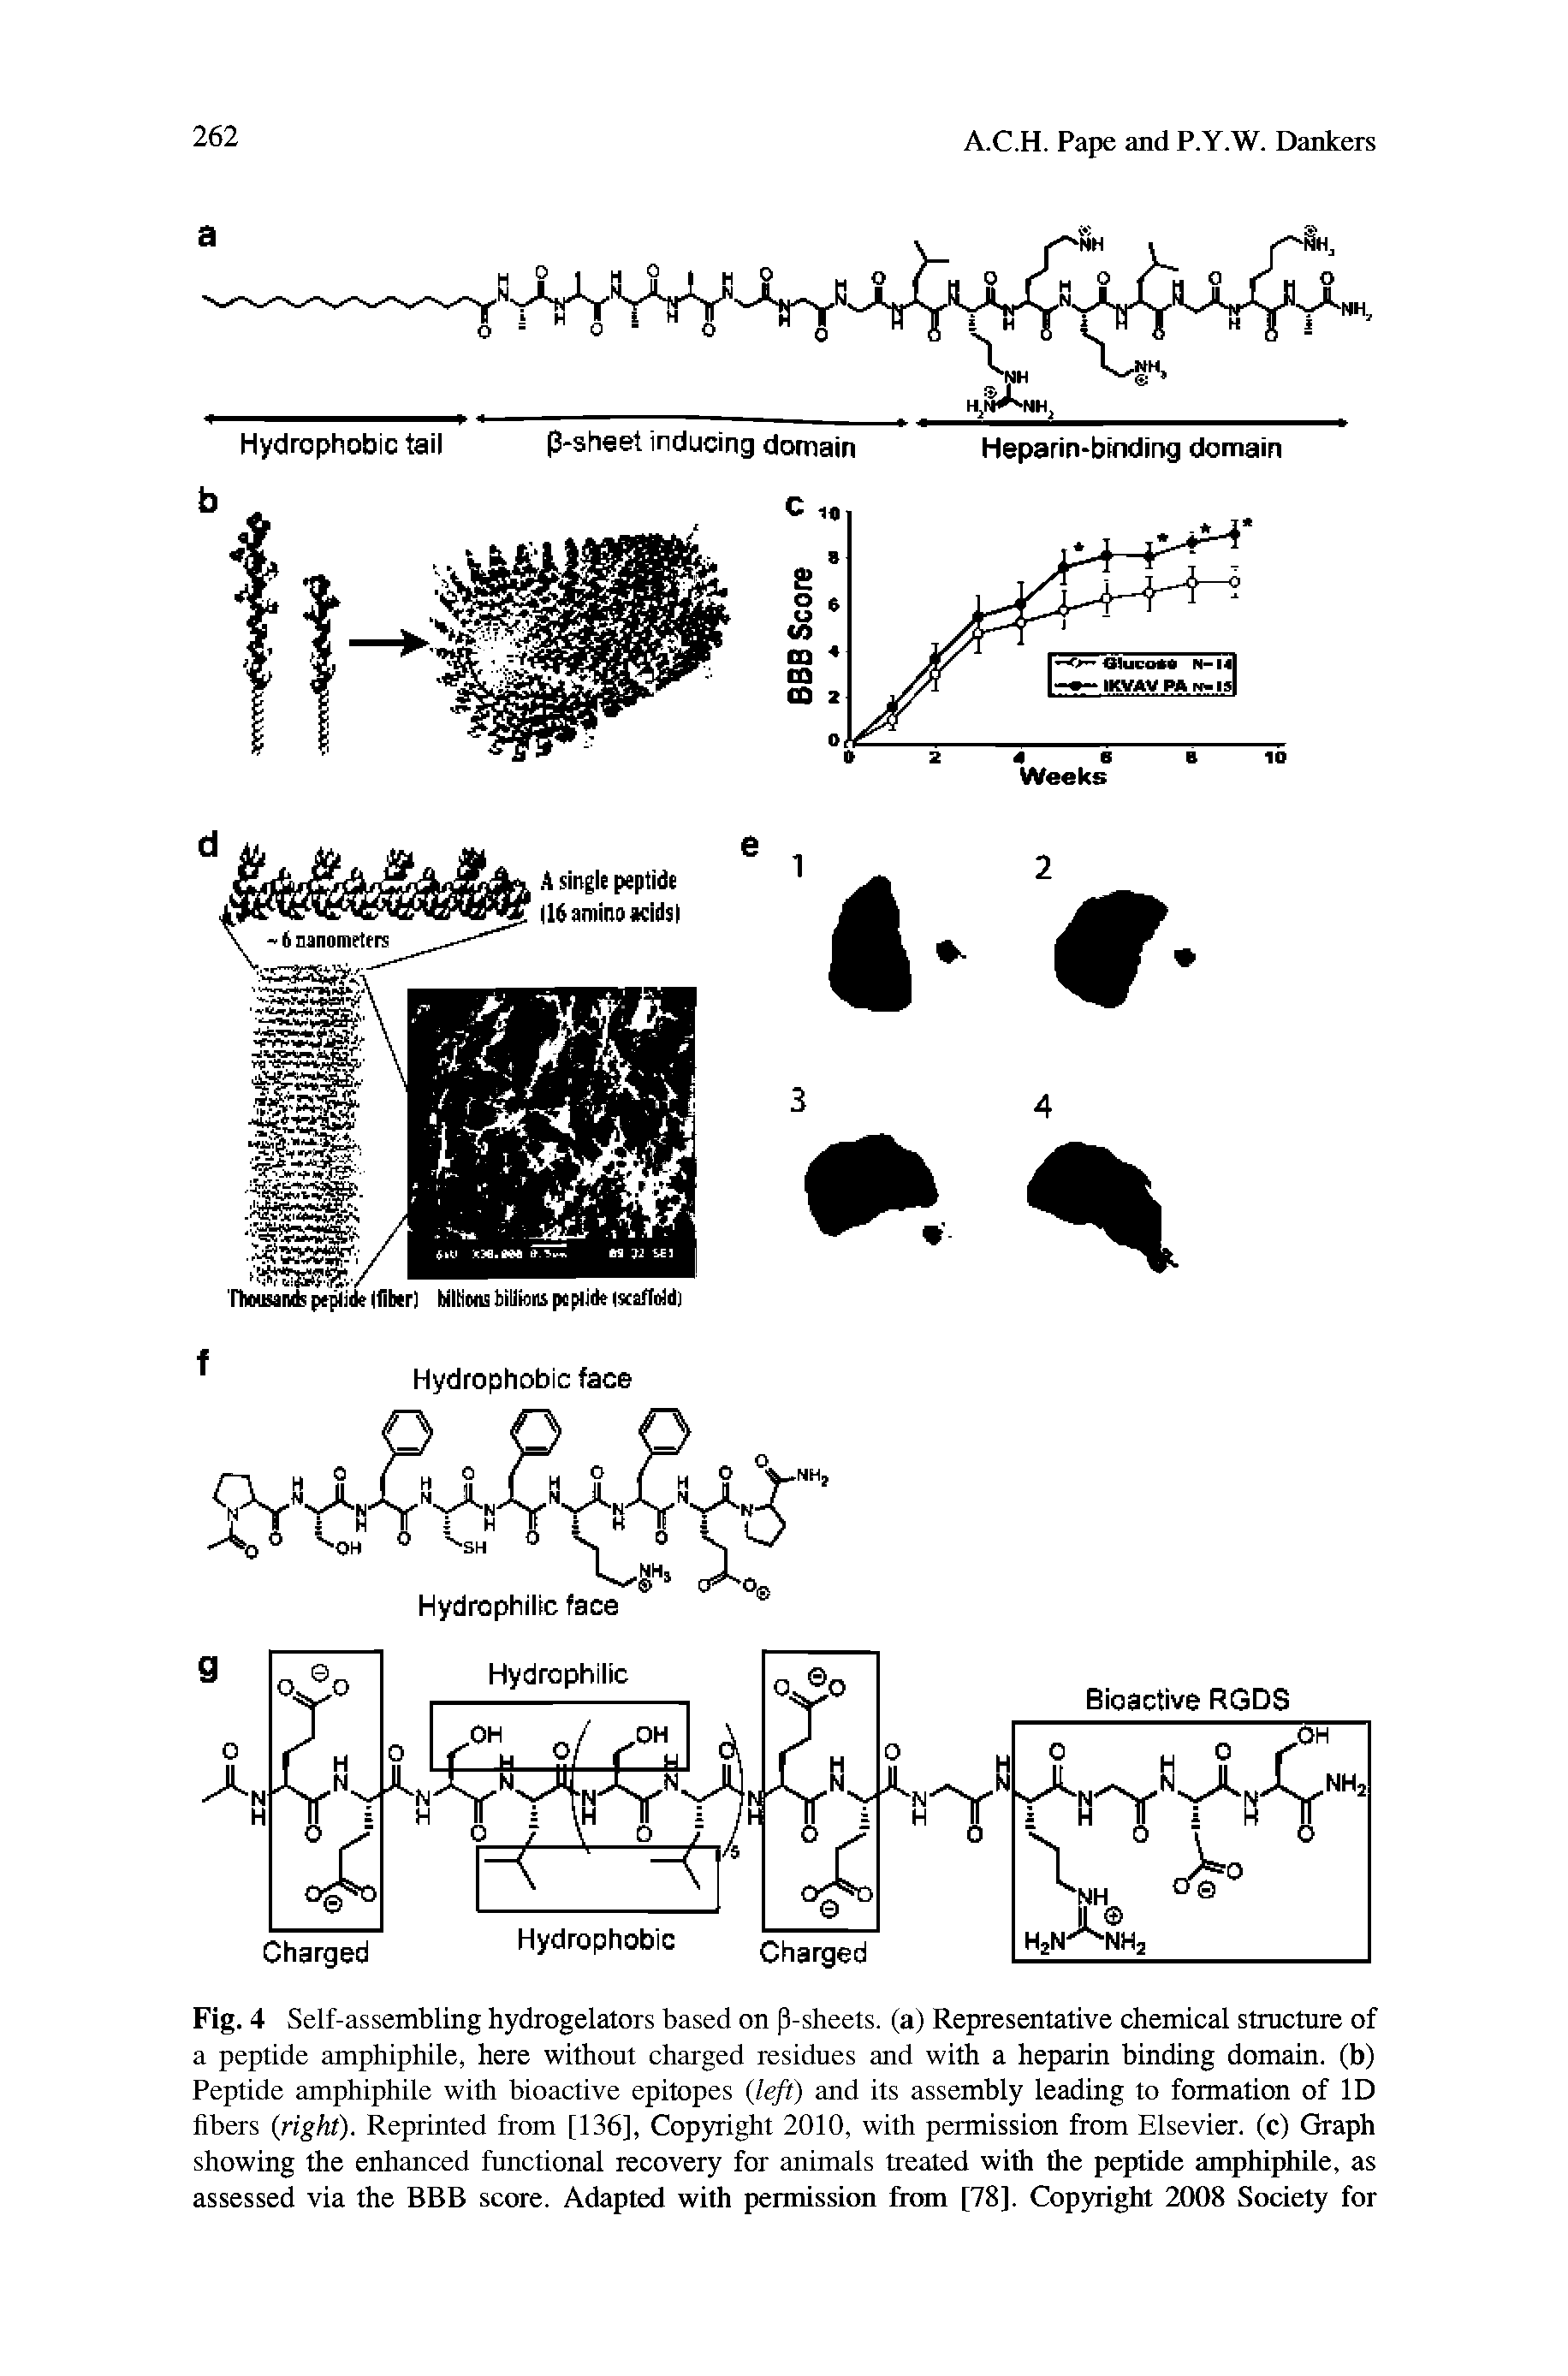 Fig. 4 Self-assembling hydrogelators based on p-sheets. (a) Representative chemical structure of a peptide amphiphile, here without charged residues and with a heparin binding domain, (b) Peptide amphiphile with bioactive epitopes left) and its assembly leading to formation of ID fibers right). Reprinted from [136], Copyright 2010, with permission from Elsevier, (c) Graph showing the enhanced functional recovery for animals treated with the peptide amphiphile, as assessed via the BBB score. Adapted with permission from [78]. Copyright 2008 Society for...